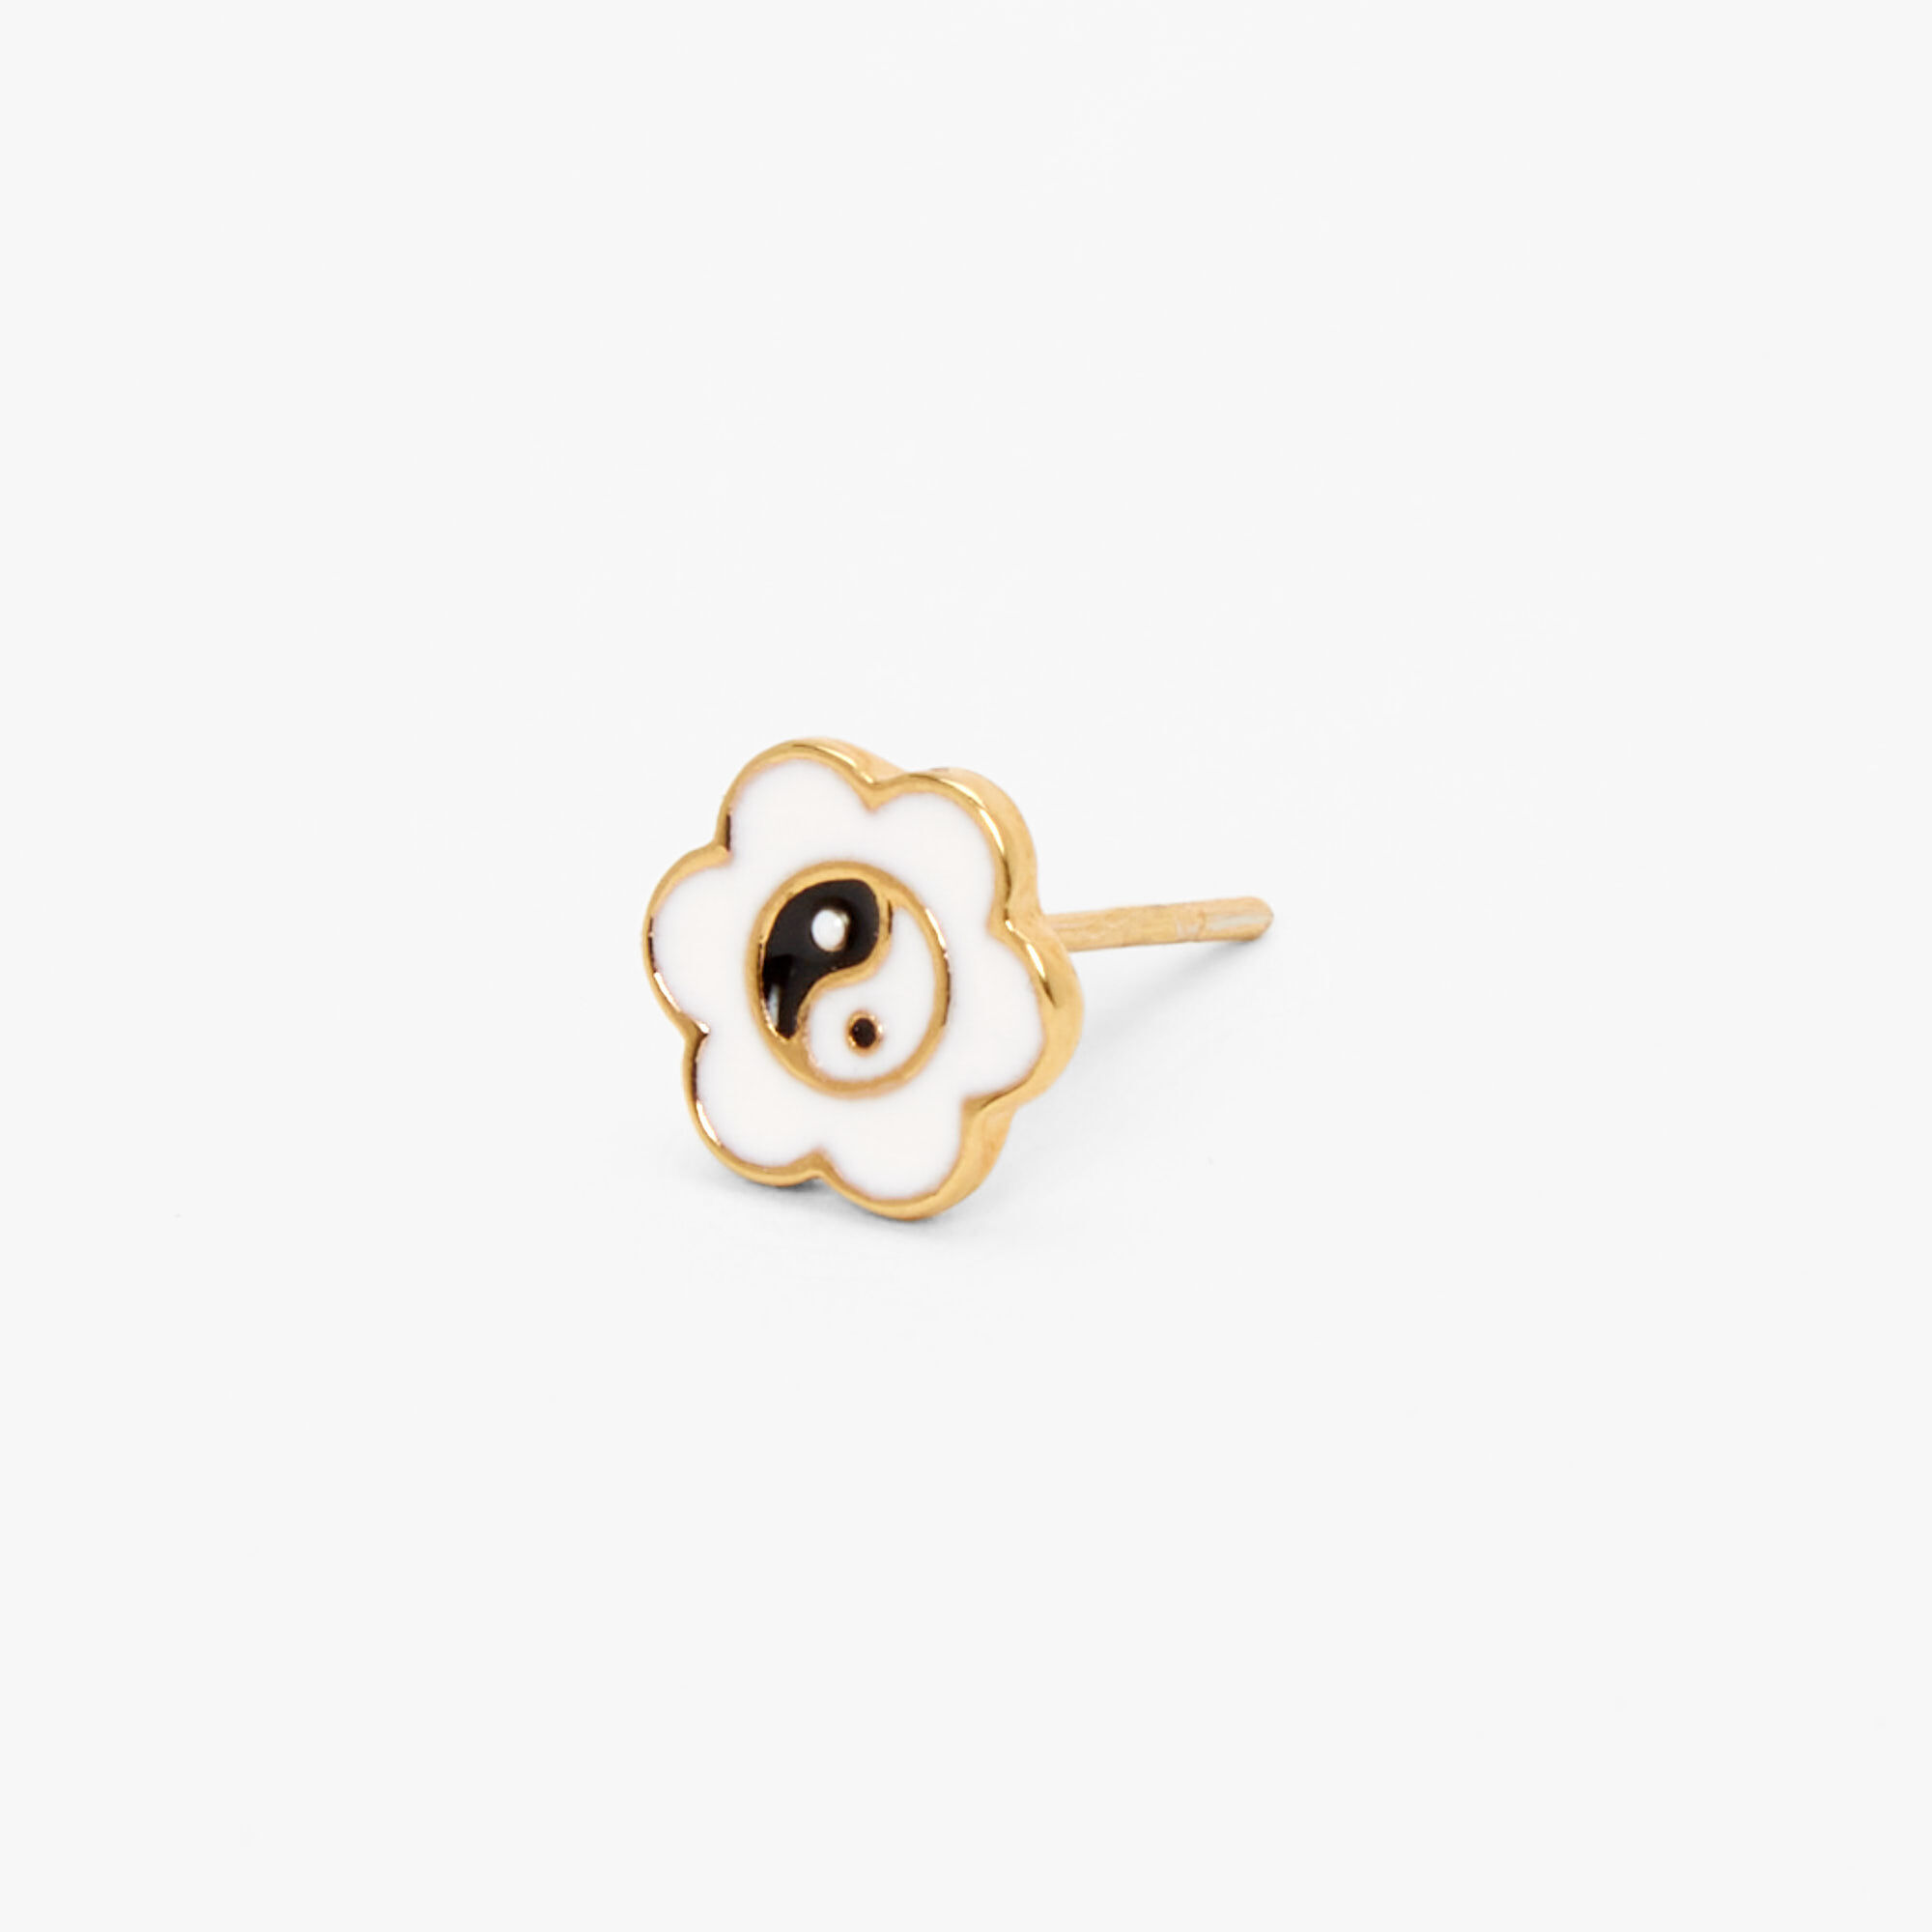 View Claires 18K Plated One Enamel Yin Yang Flower Stud Earring Gold information